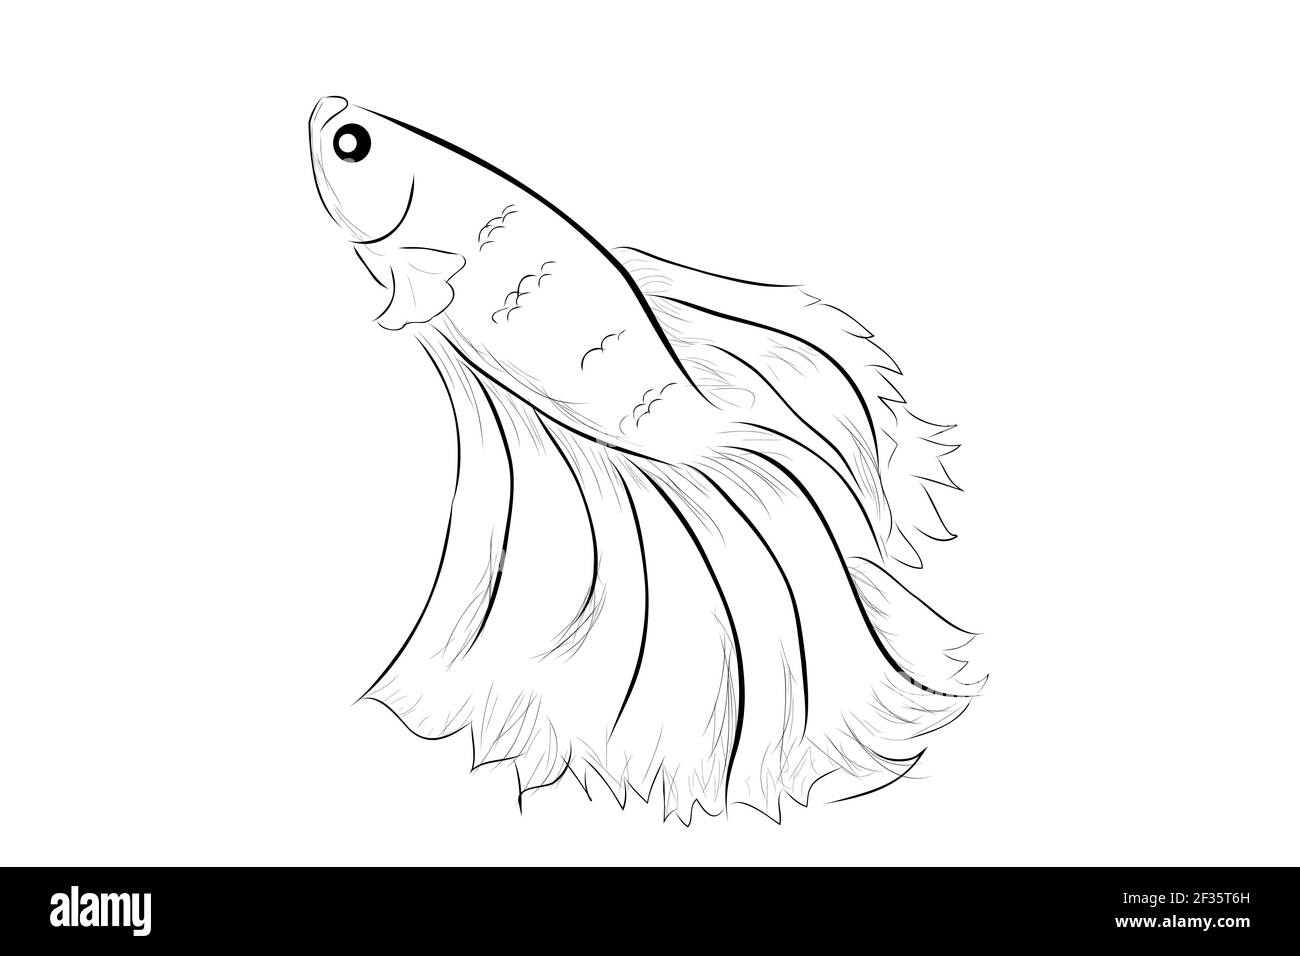 Outline Vector Betta or siamese fighting fish, Giant Half Moon, on White background Stock Vector